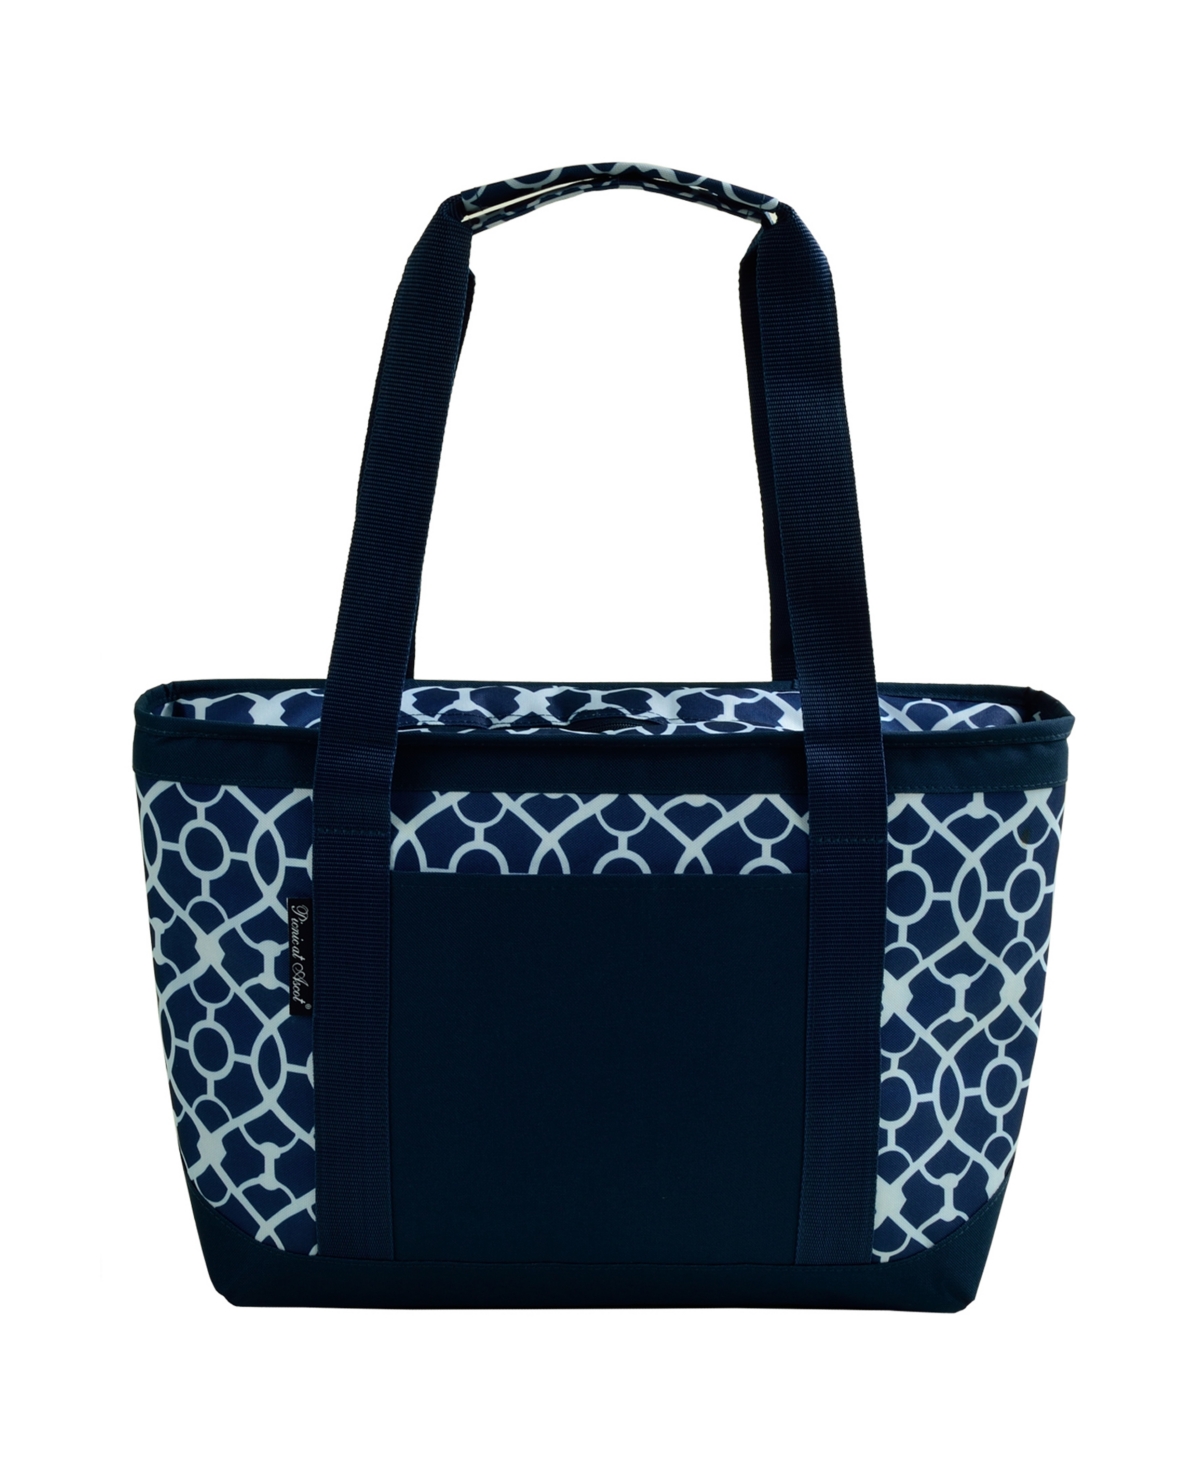 Large Insulated Cooler Bag - Blue